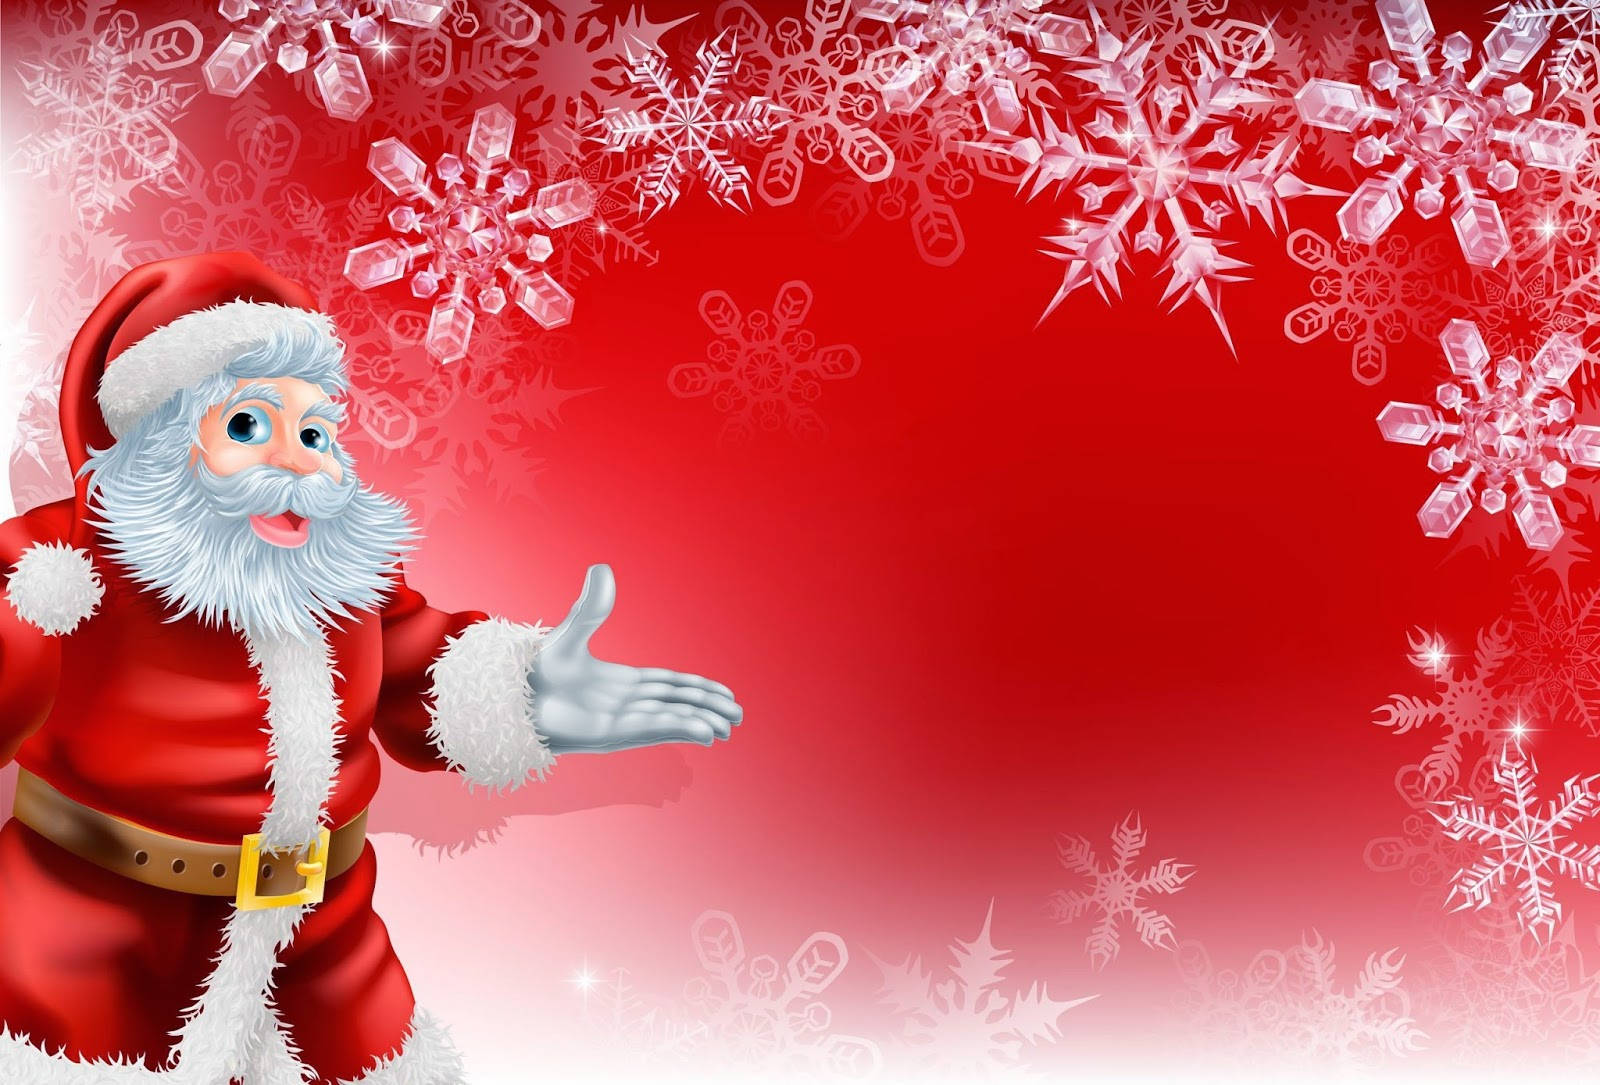 Santa Claus Red Christmas Background Wallpaper